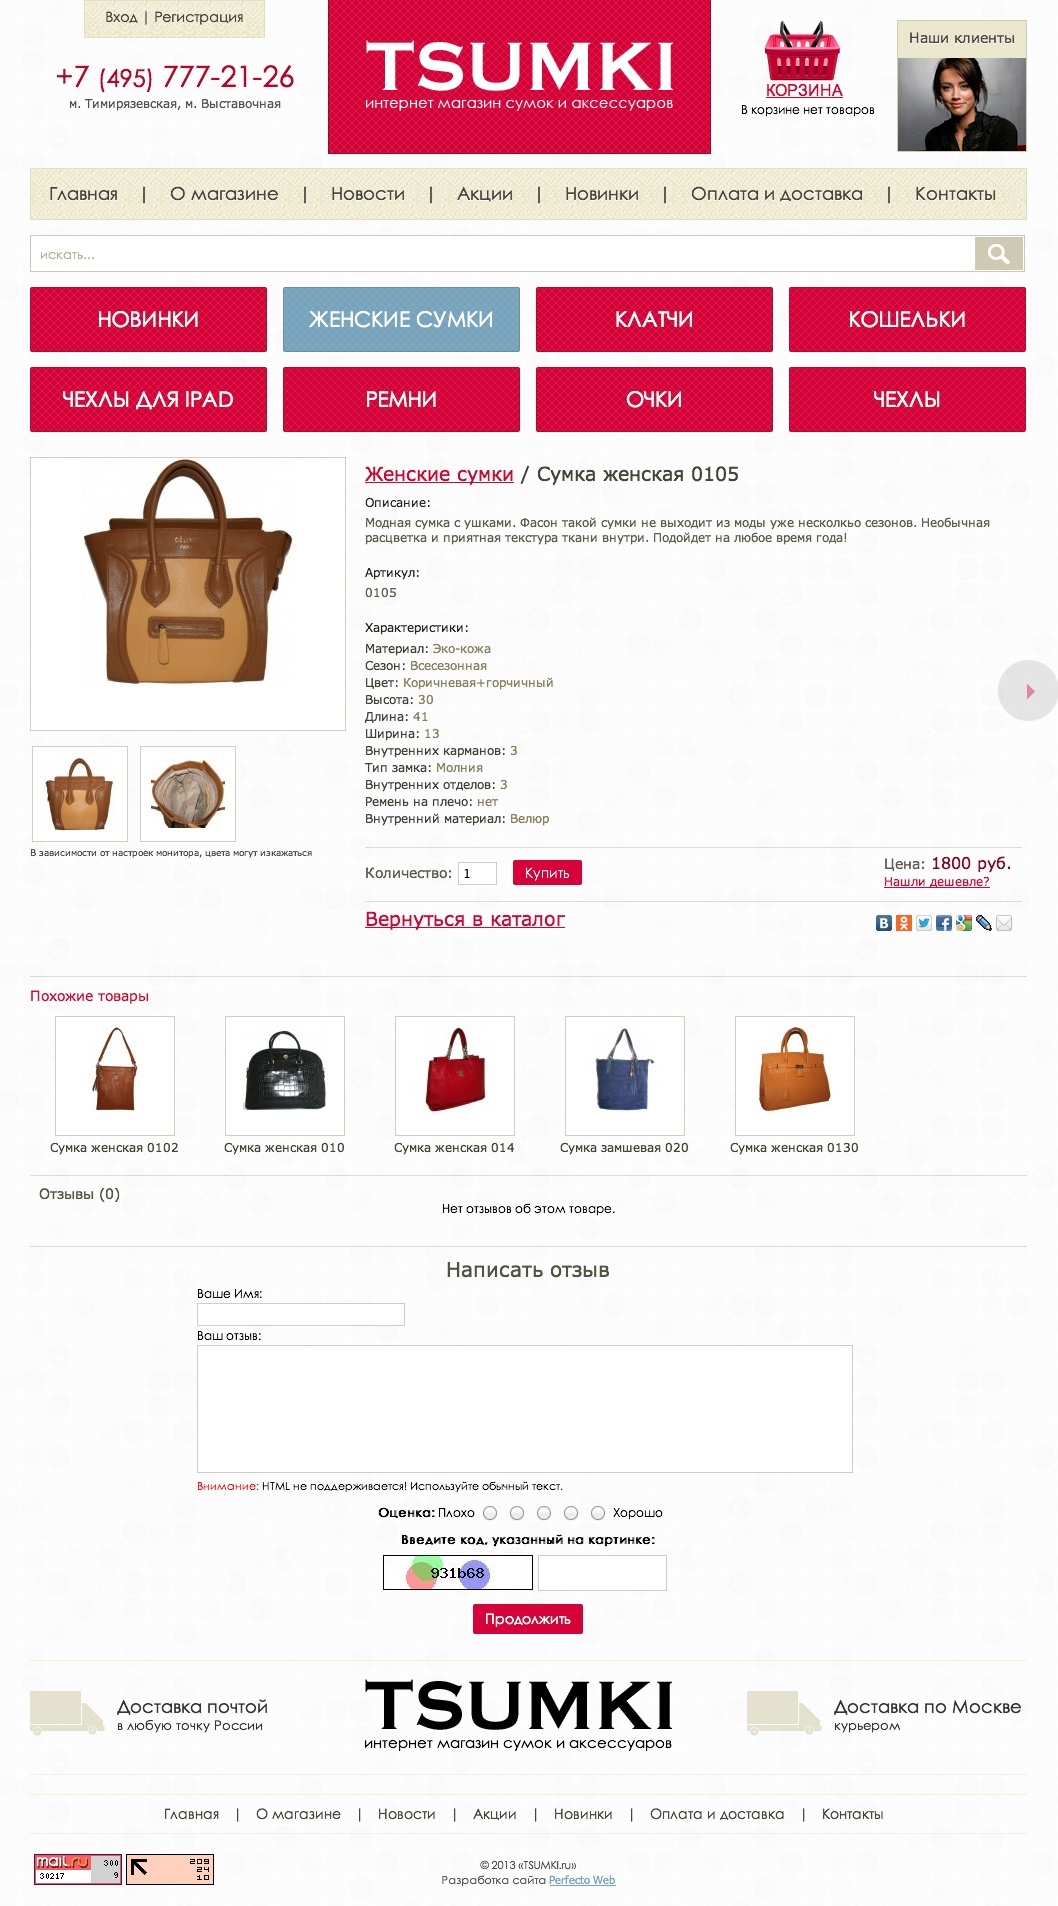 Tsumki - handbags and accessories online shop №3- Store item full page